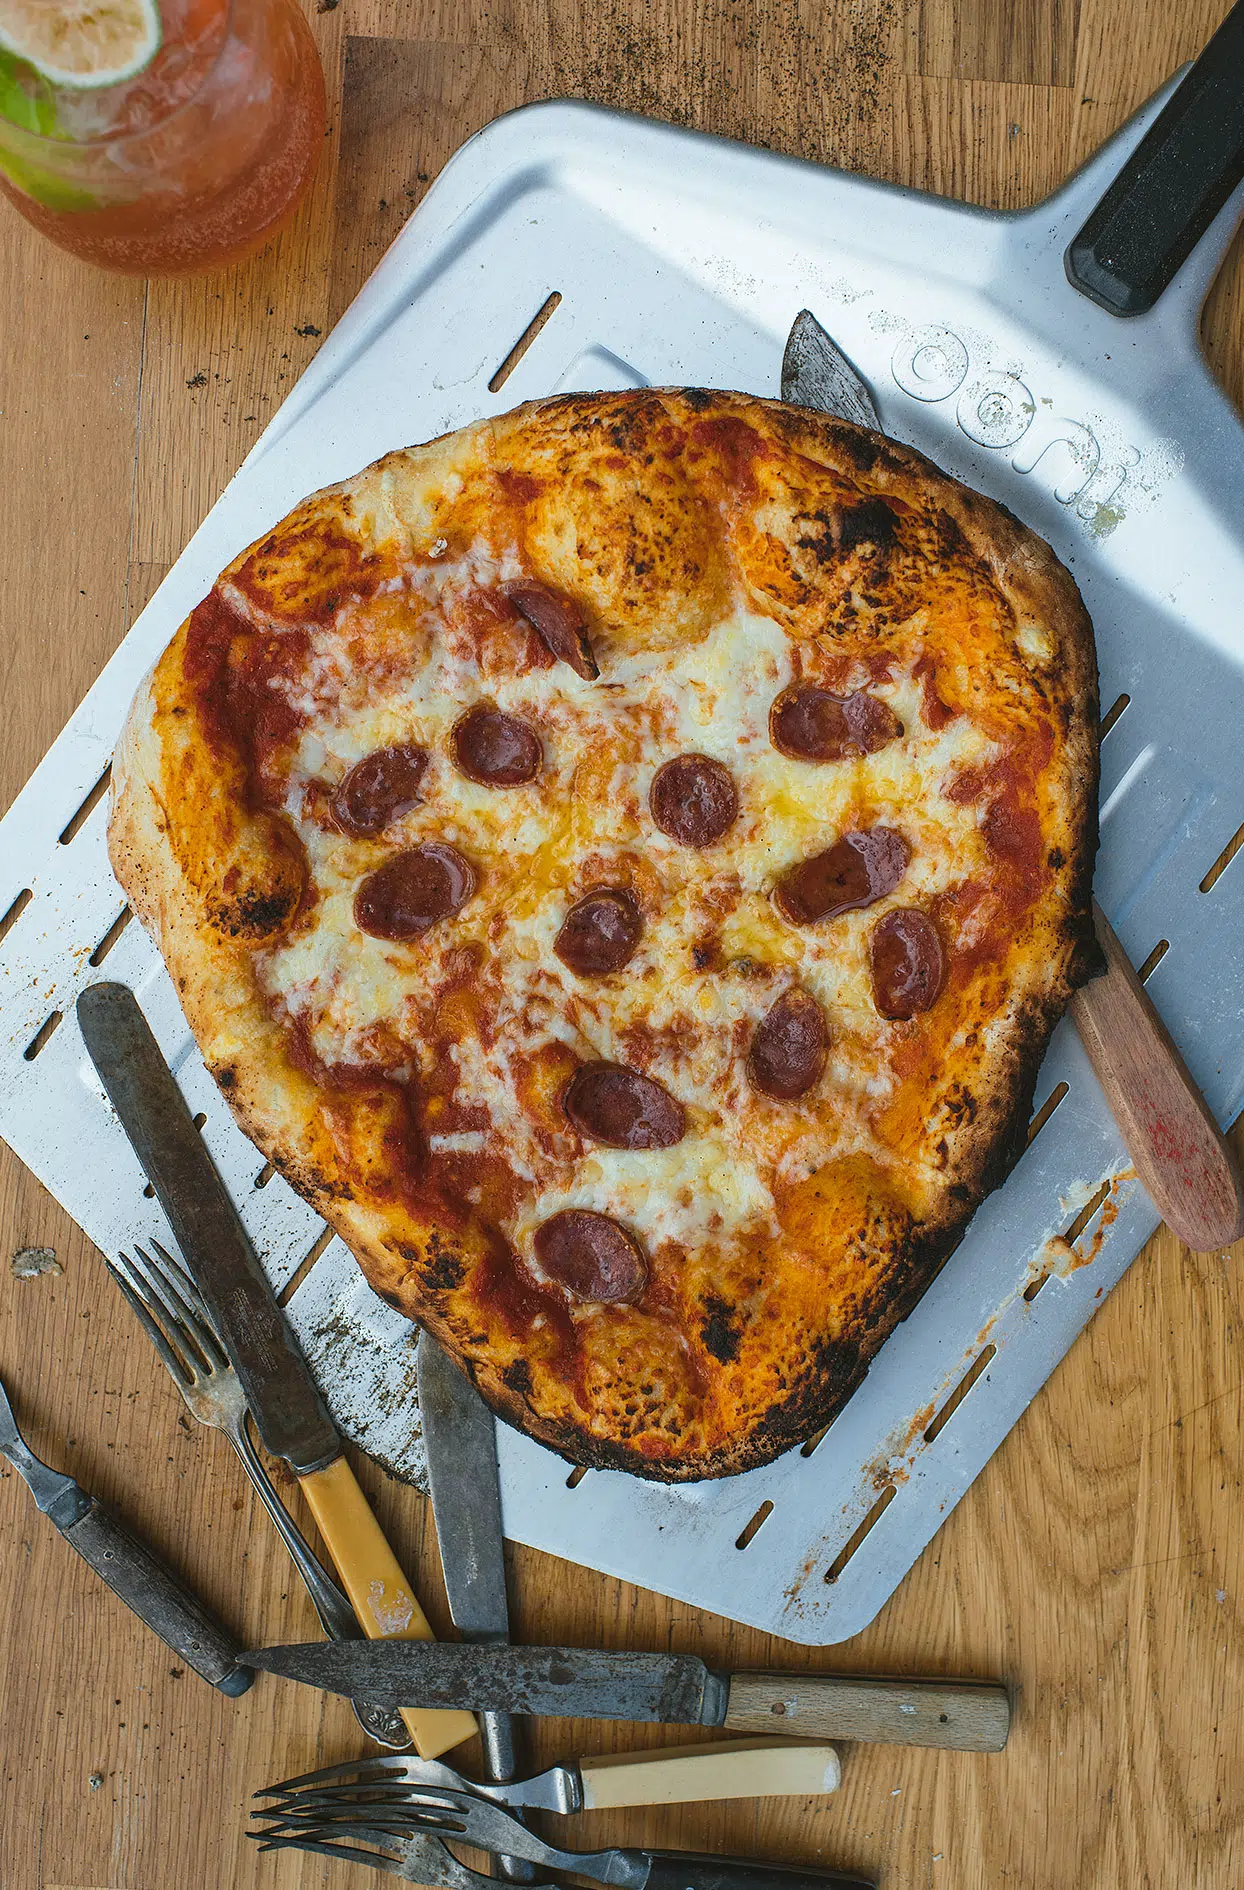 Cheese and sausage pizza with grilled tomato sauce